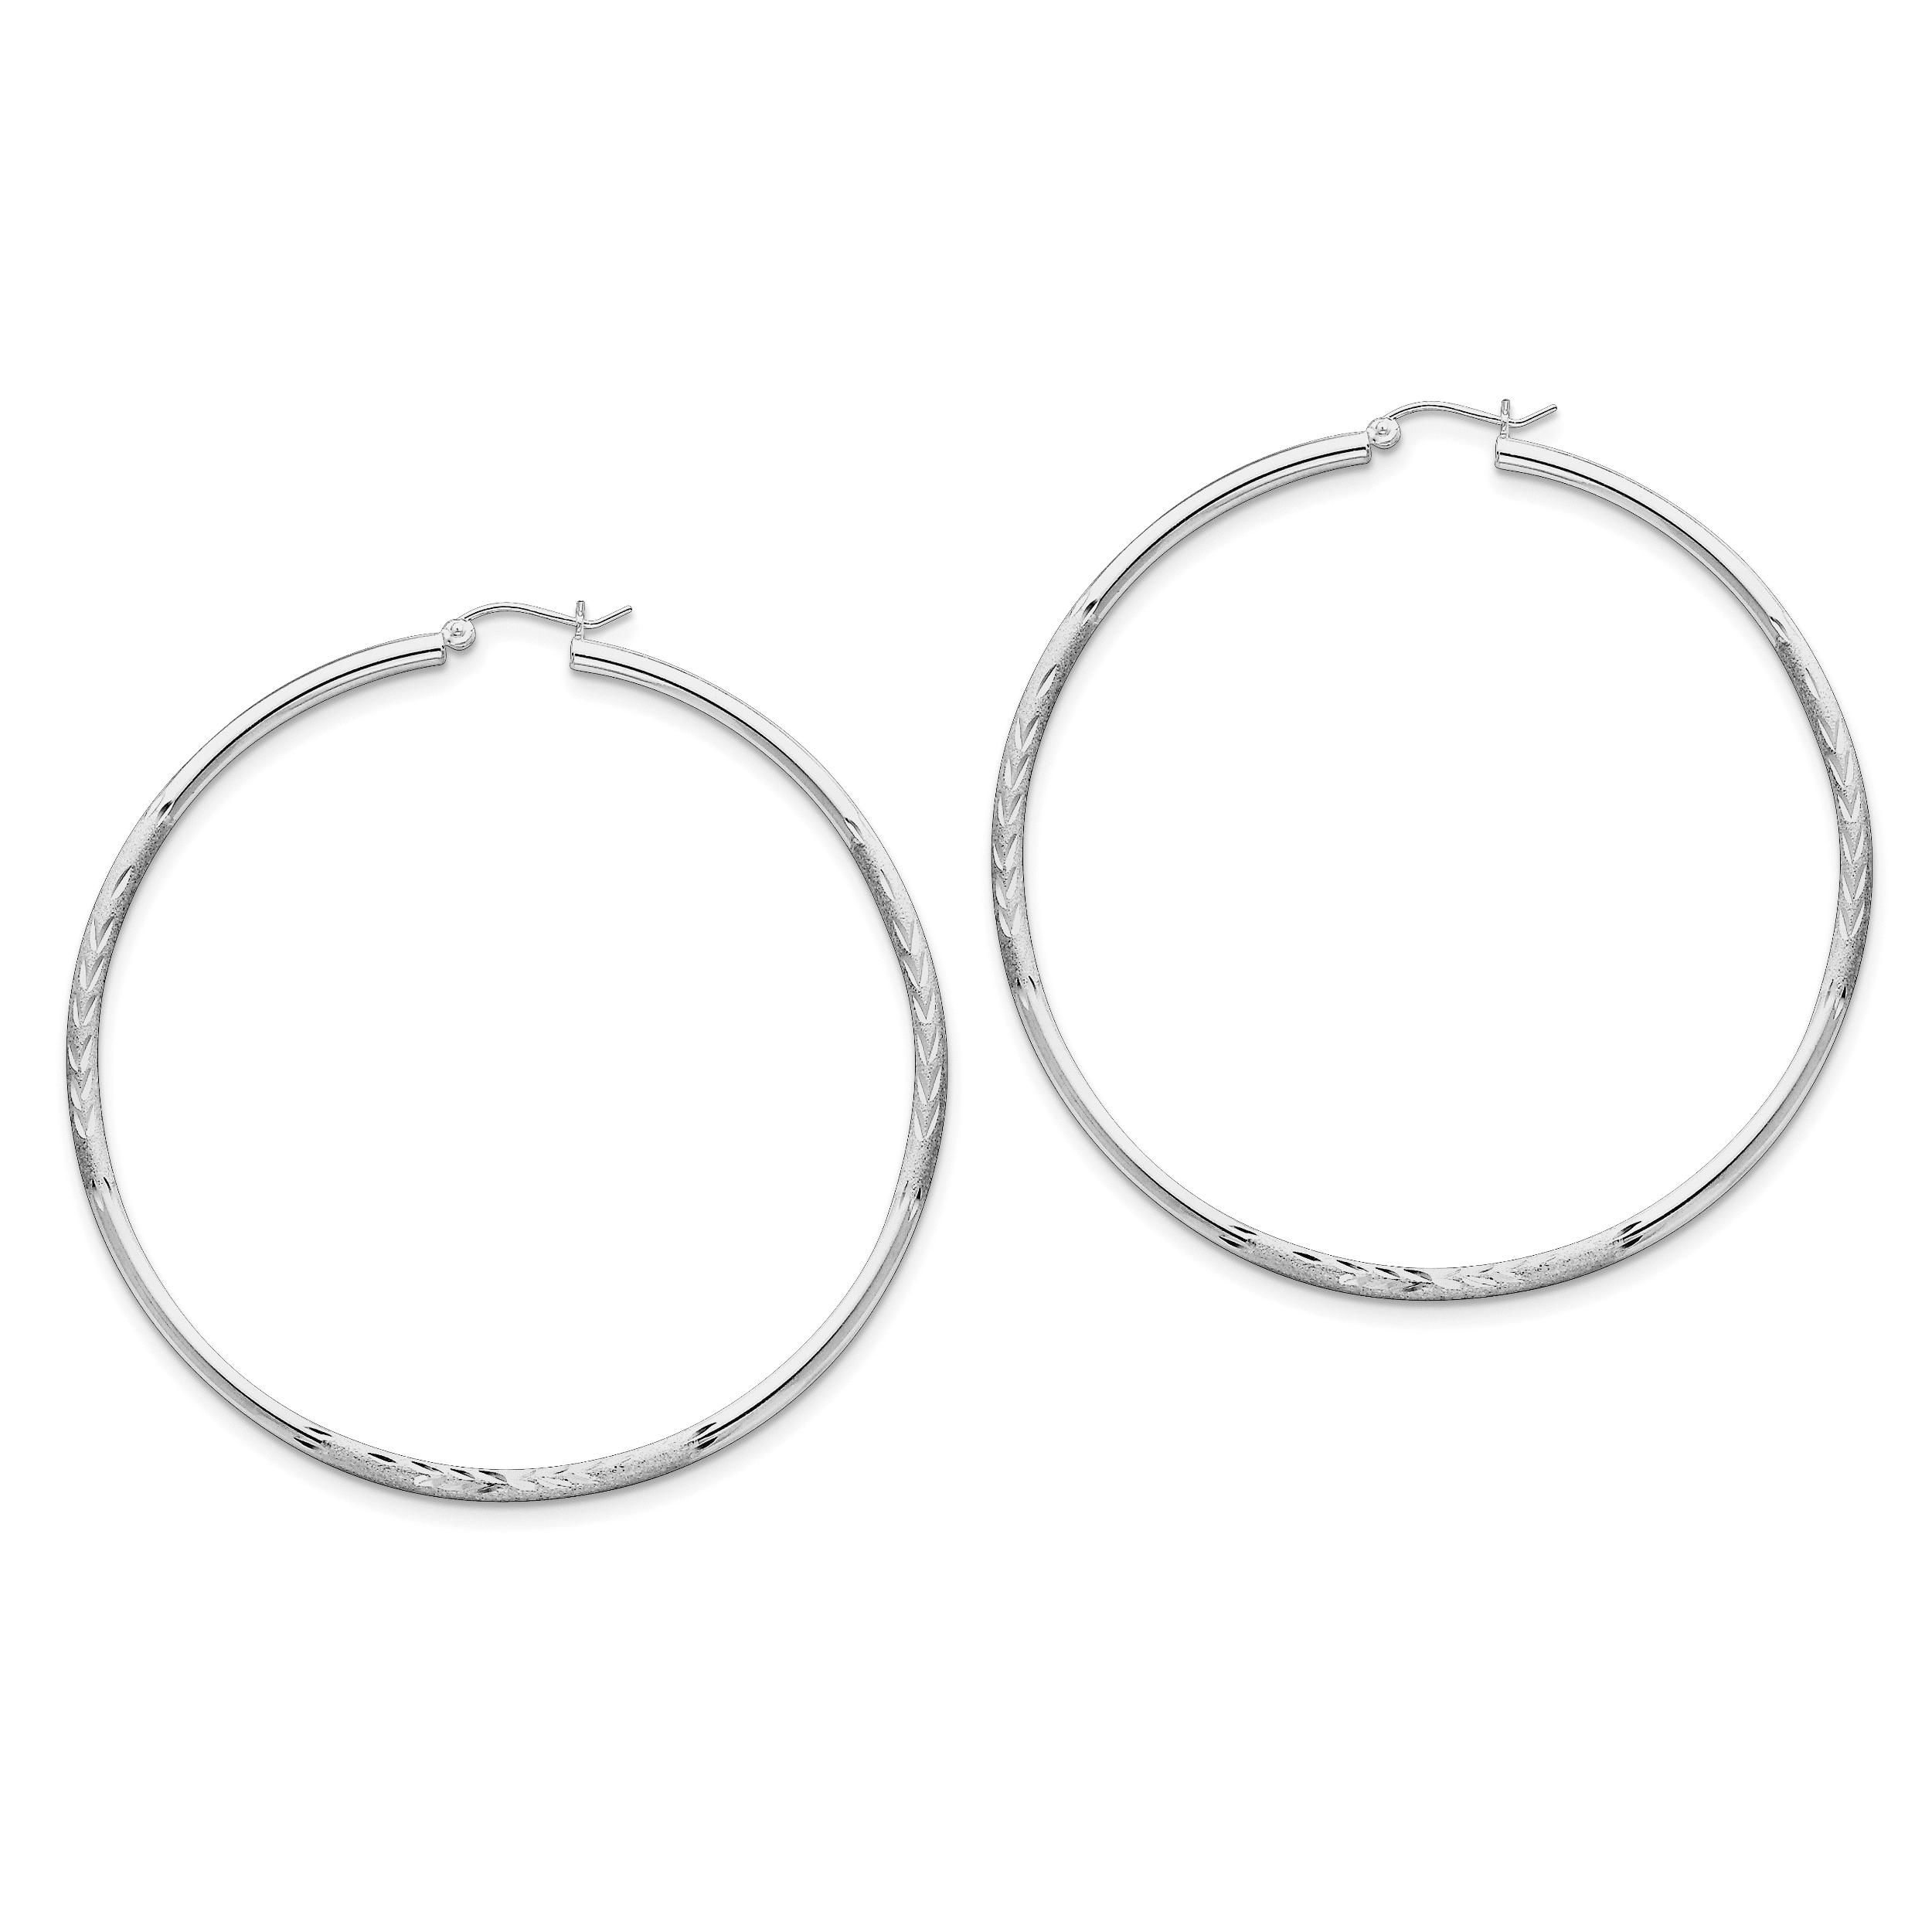 Sterling Silver Rhodium Plated Polished and Satin Twist Hoop Earrings